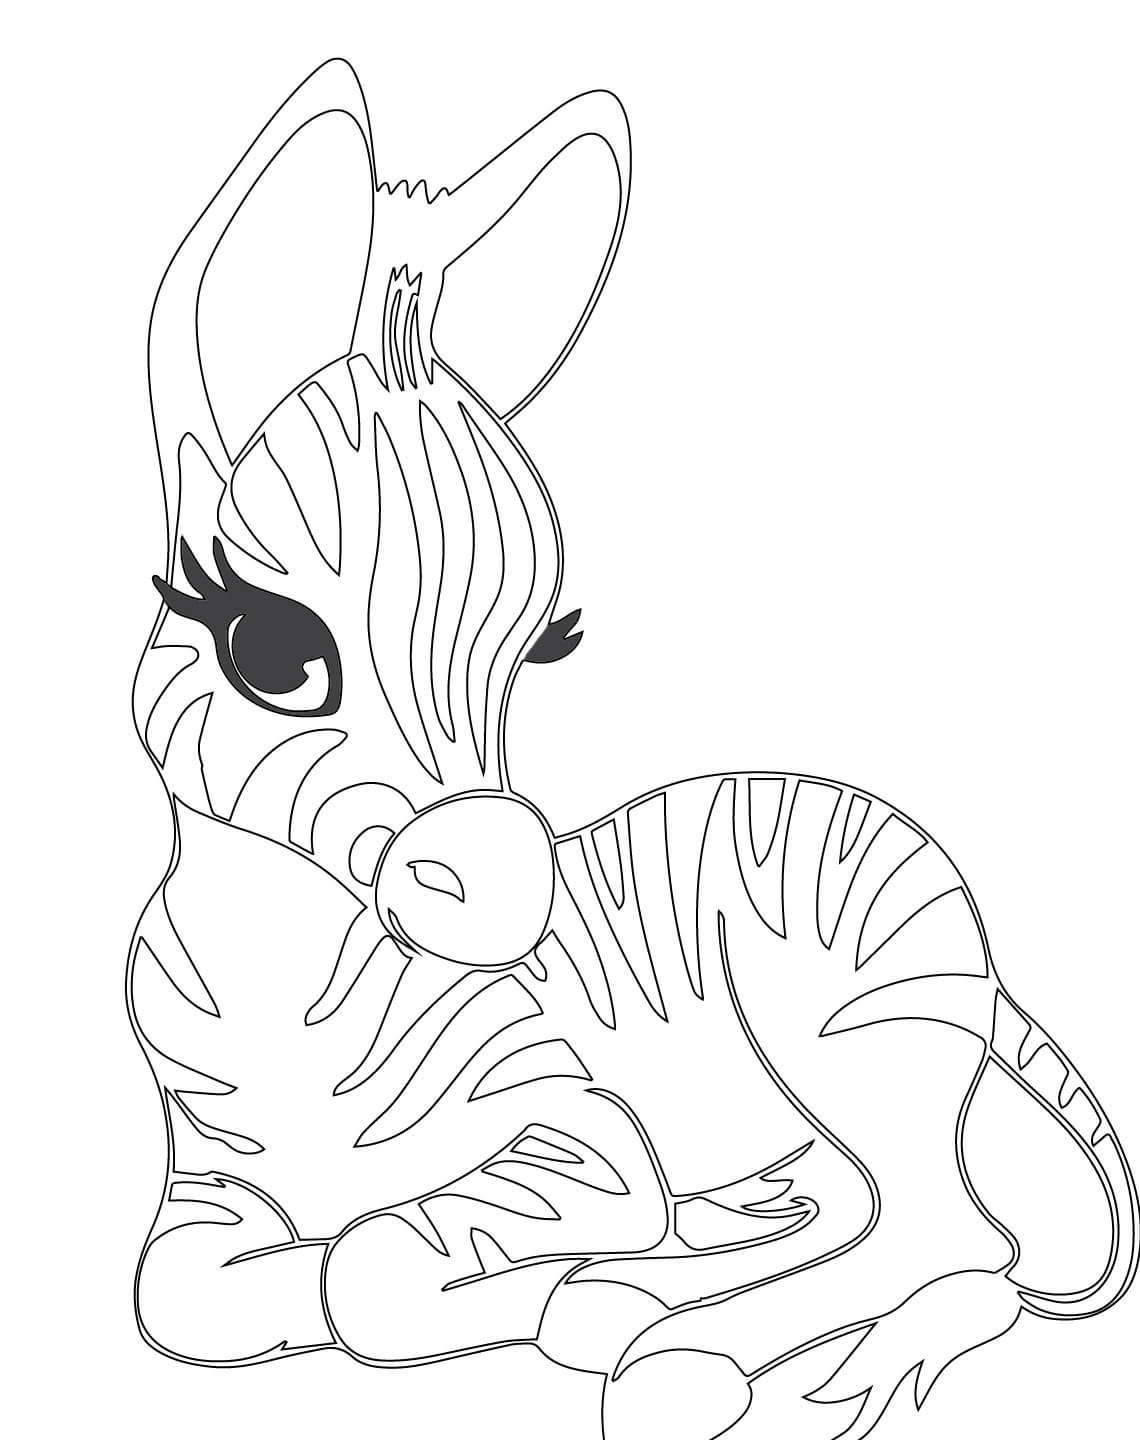 Cute Baby Zebra Coloring Pages at GetColorings.com | Free printable